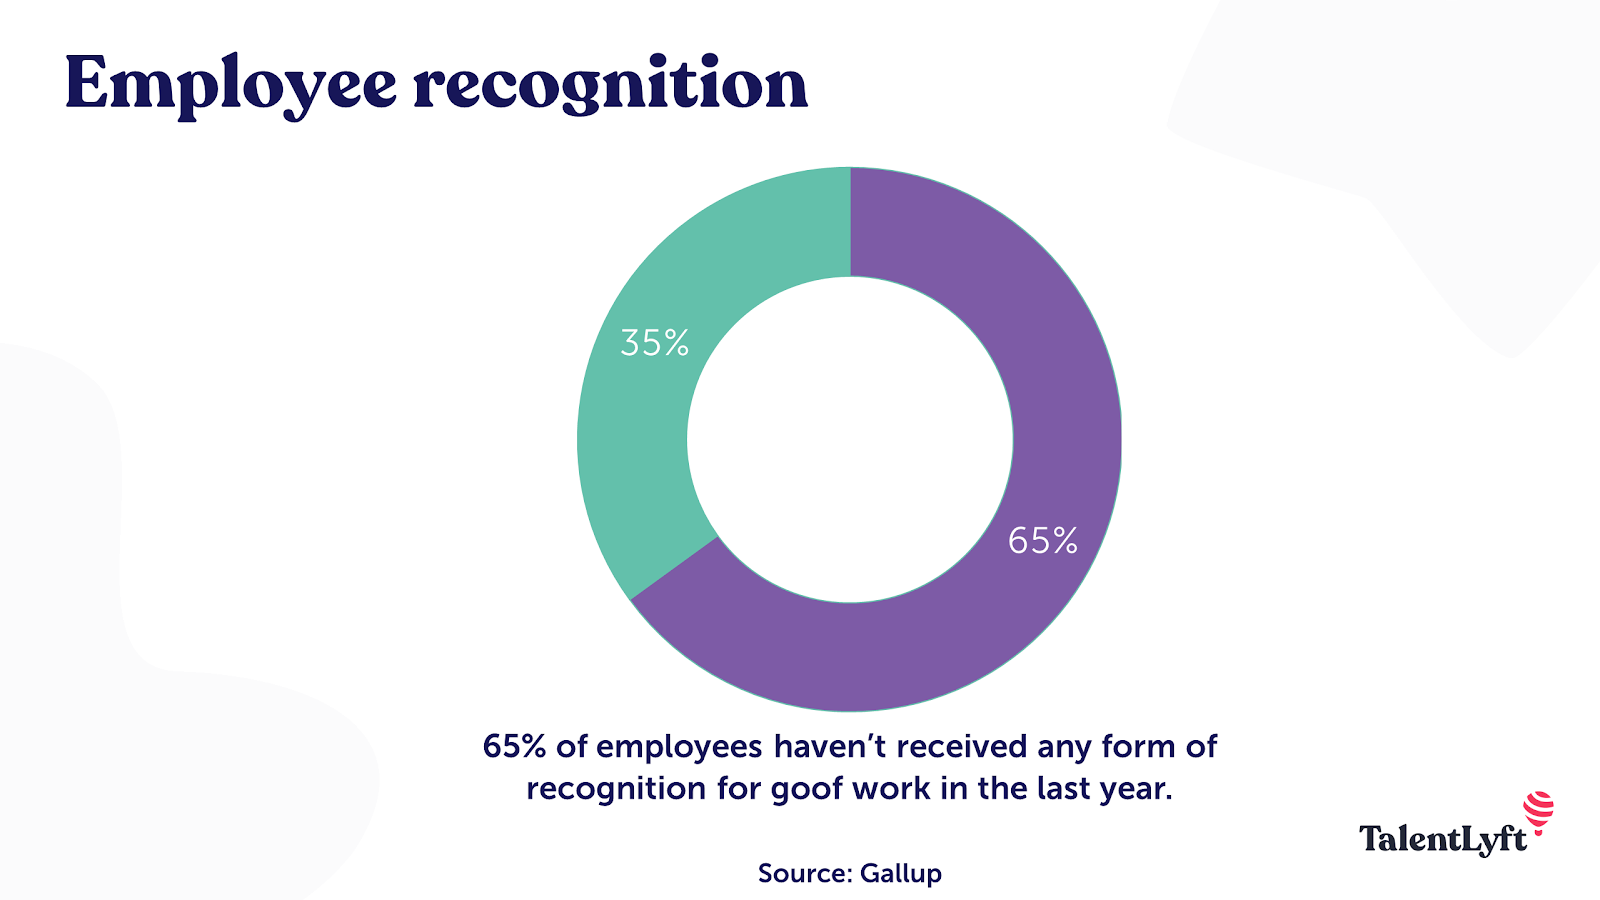 Recognize your employees - employee recognition stats